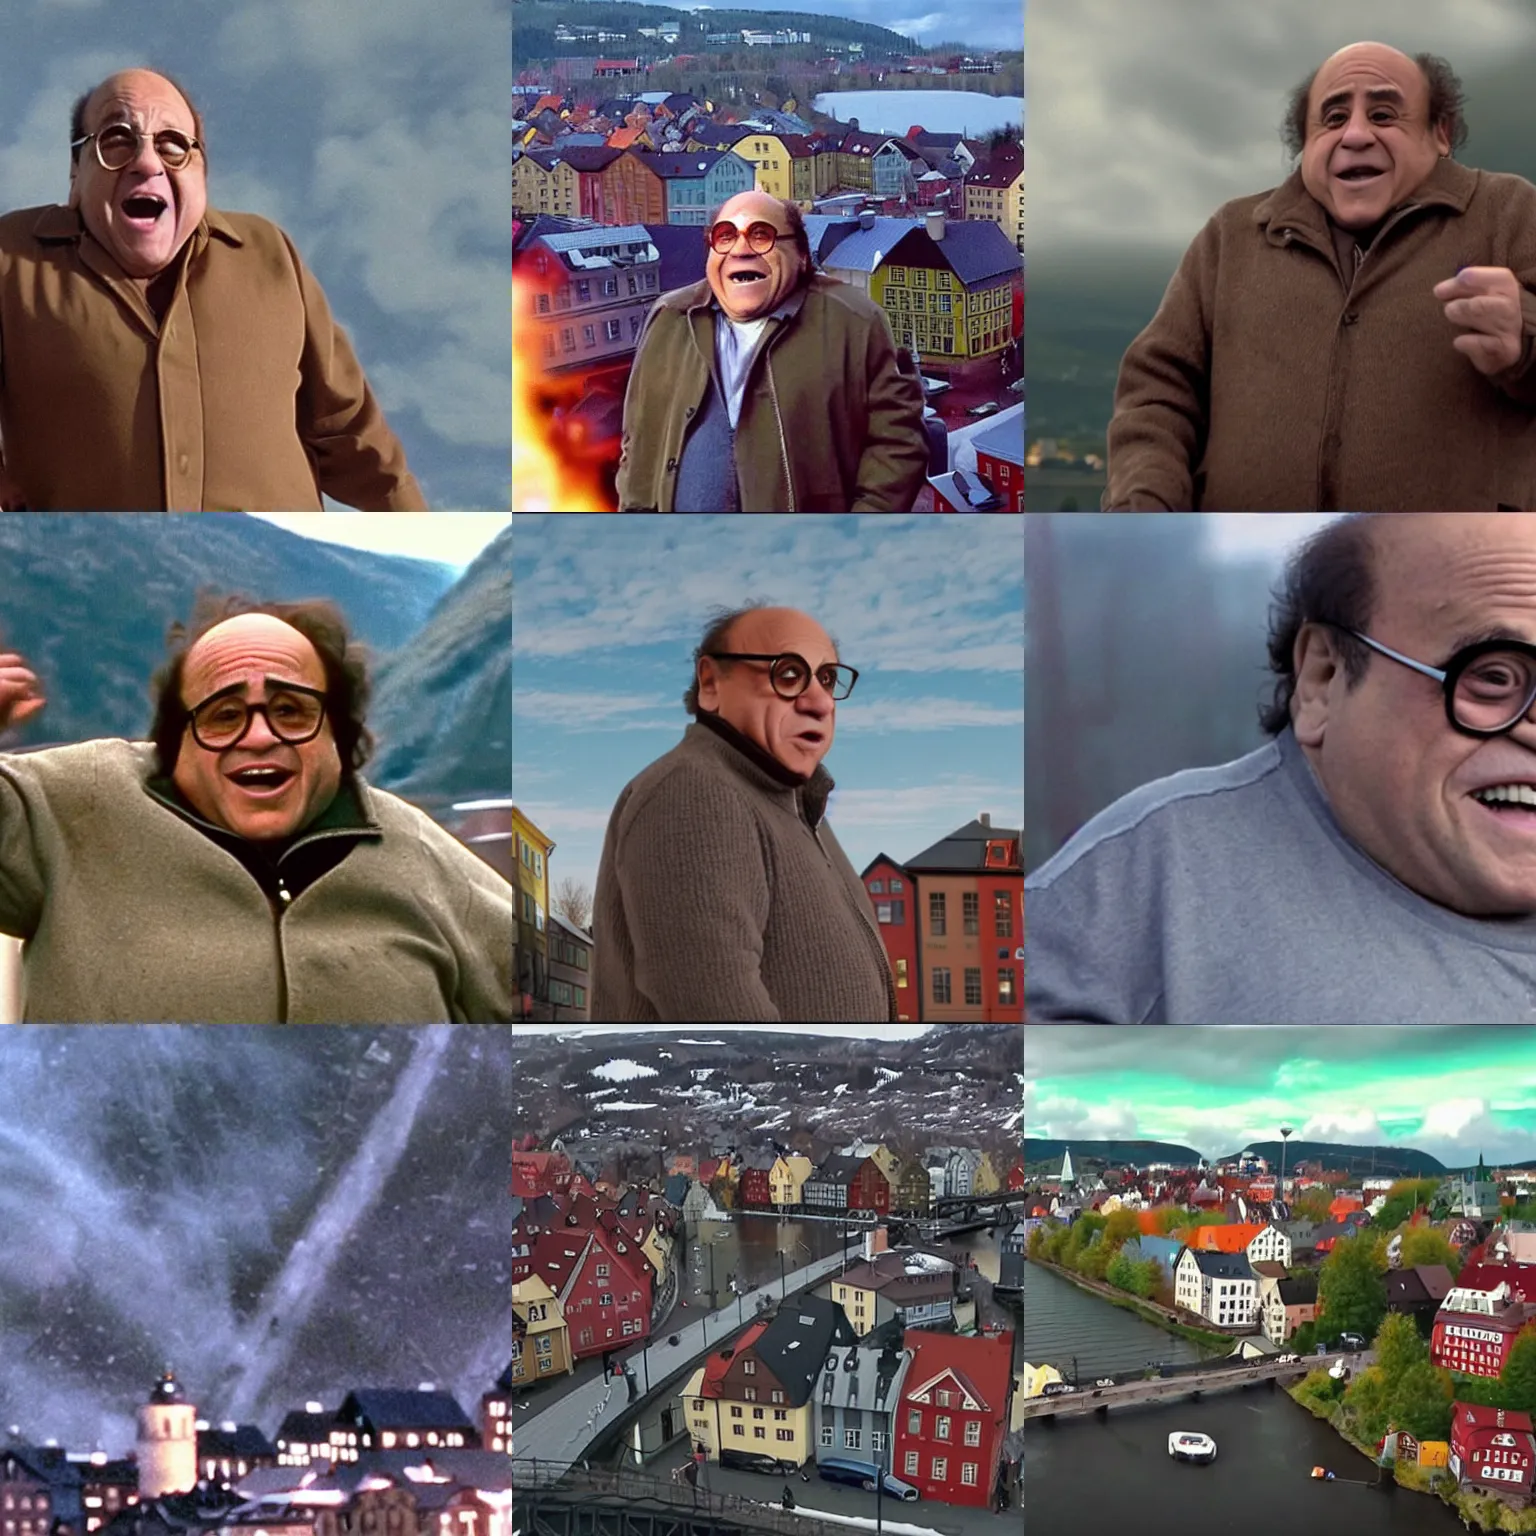 Prompt: Danny DeVito is a giant, he is attacking Trondheim, Norway, screenshot from movie